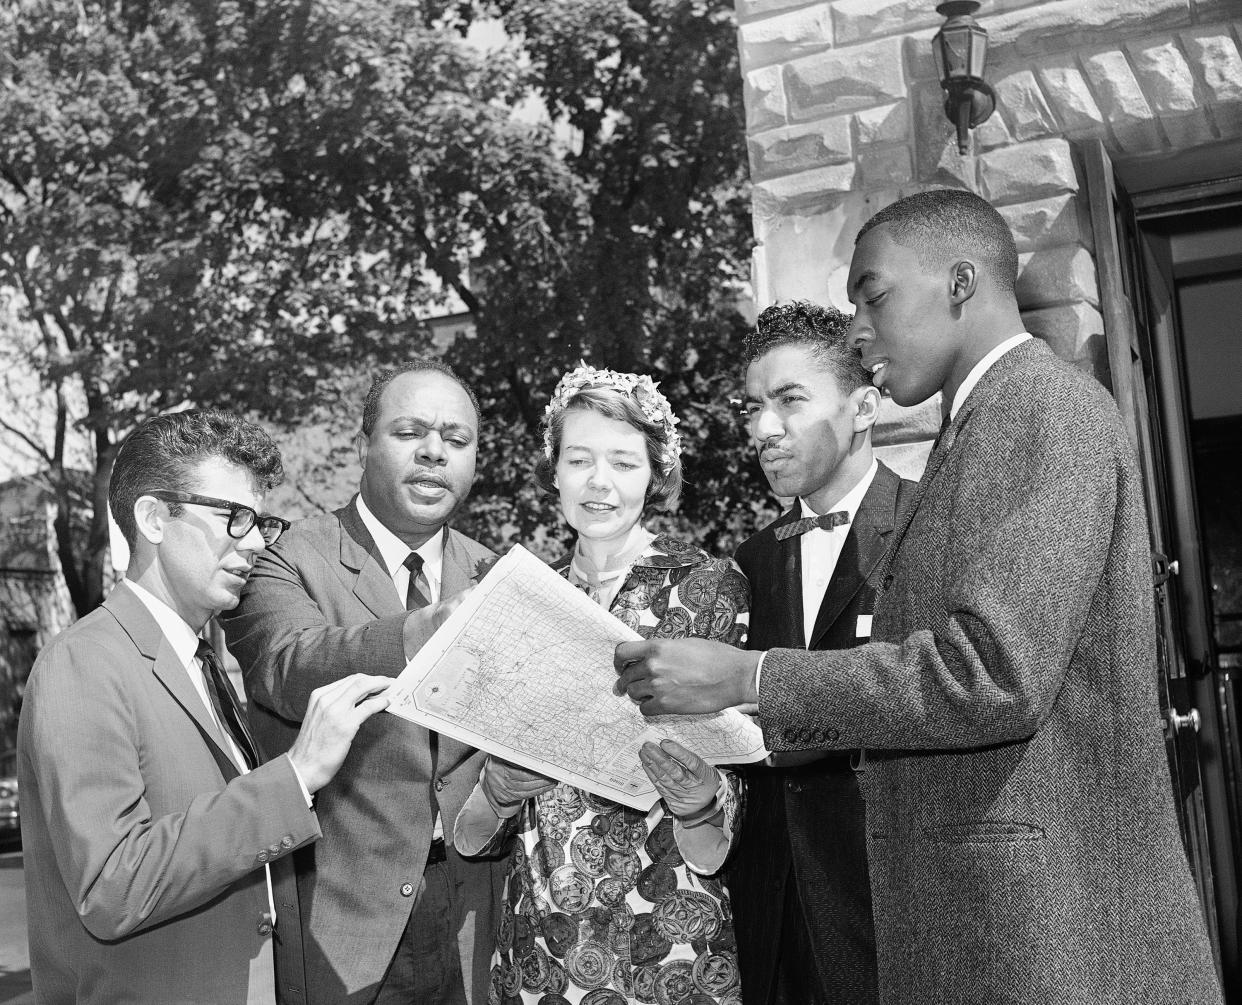 Members of an interracial group pose in Washington, with a map of a route they plan to take to test segregation in bus terminal restaurants and rest rooms in the South, May 4, 1961. From left are: Edward Blankenheim, Tucson, Ariz.; James Farmer, New York City; Genevieve Hughes, Chevy Chase, Md.; the Rev. B. Elton Cox, High Point, N.C., and Henry Thomas, St. Augustine, Fla. They are all members of the Congress of Racial Equality, the organization sponsoring the trip.